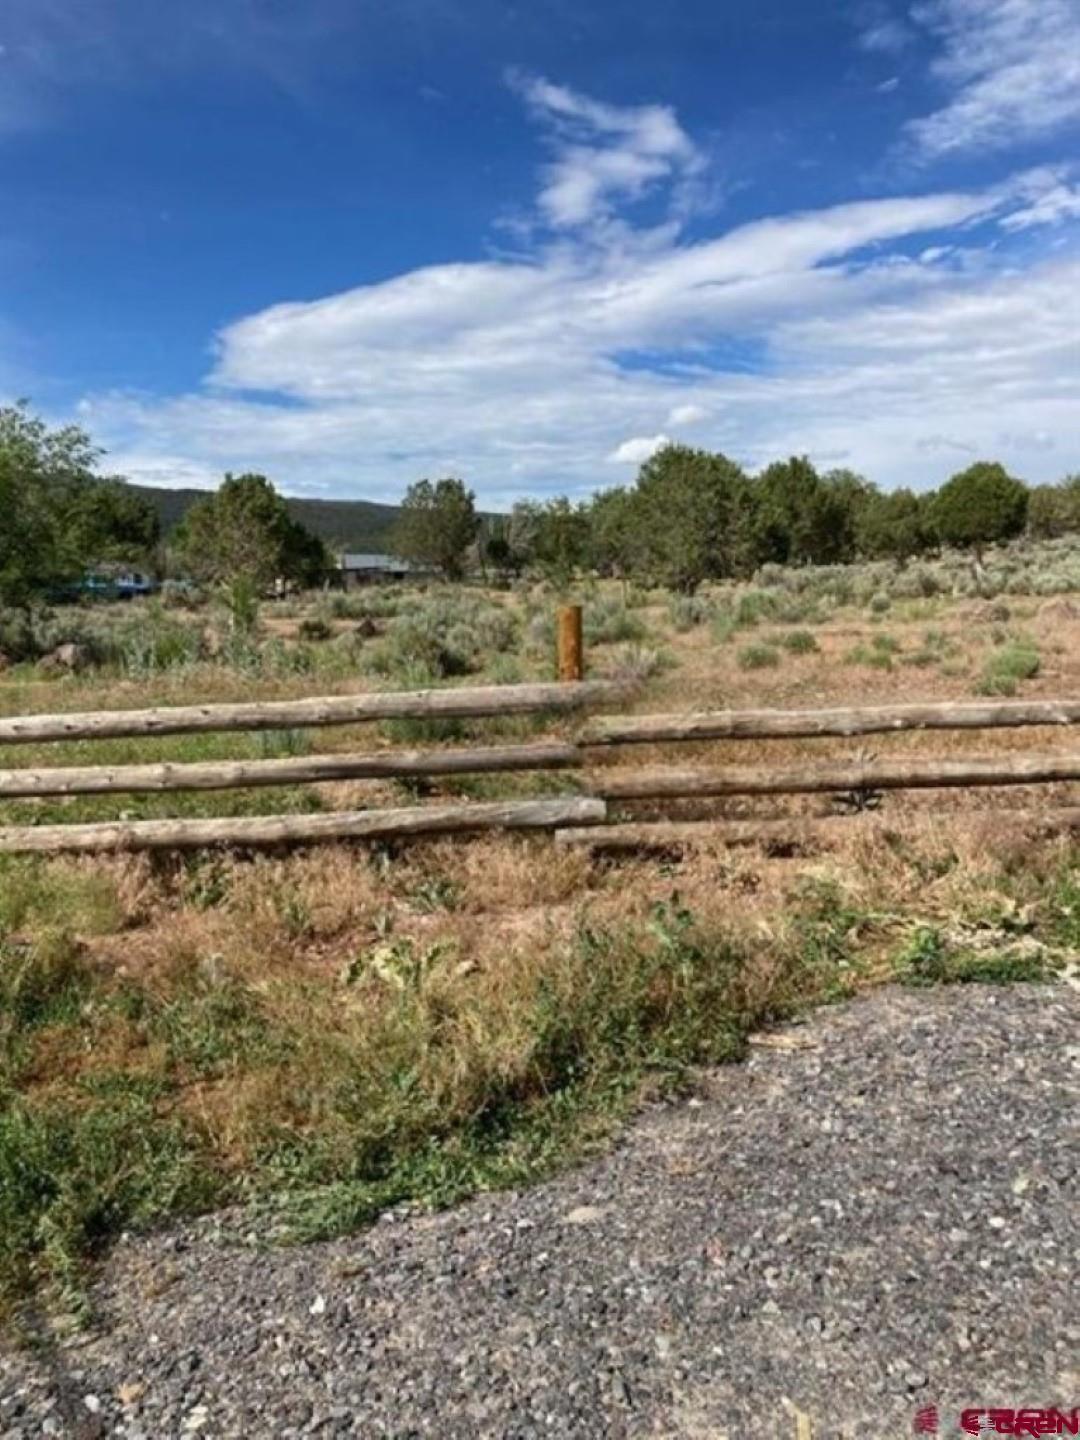 Beautiful location, close to Cedaredge and the Grand Mesa. Expansive views of the Grand Mesa and the valley towards Delta. Quiet private land ready for your new home. No covenants for the subdivision, just the county requirements for setbacks.